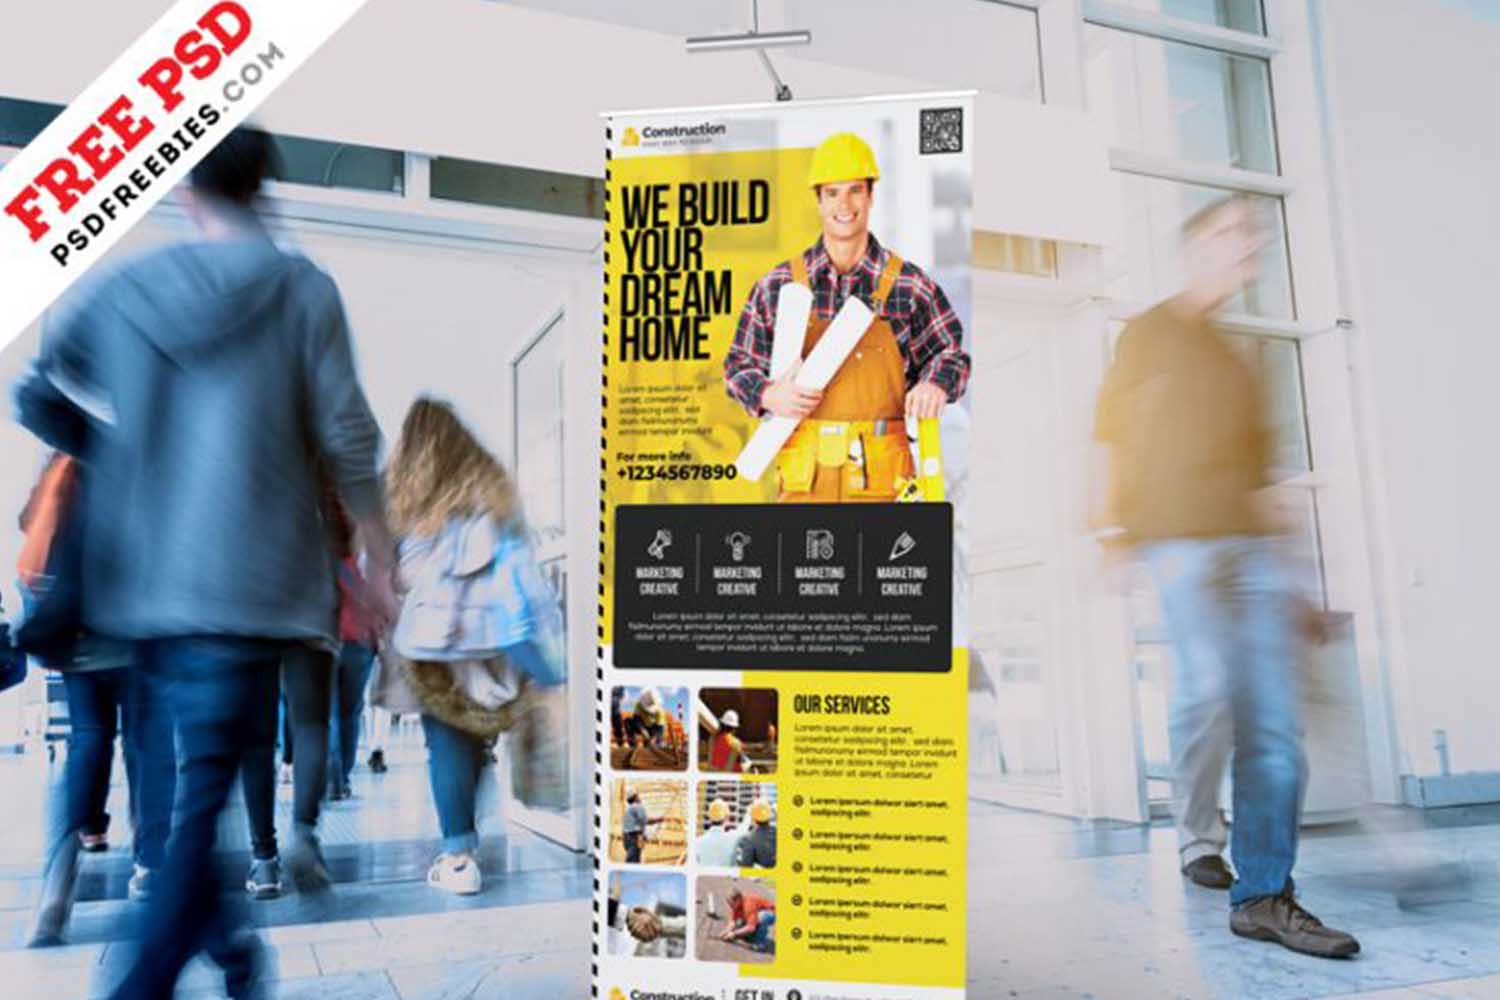 Construction Company Roll-up Banner Design PSD Free Download